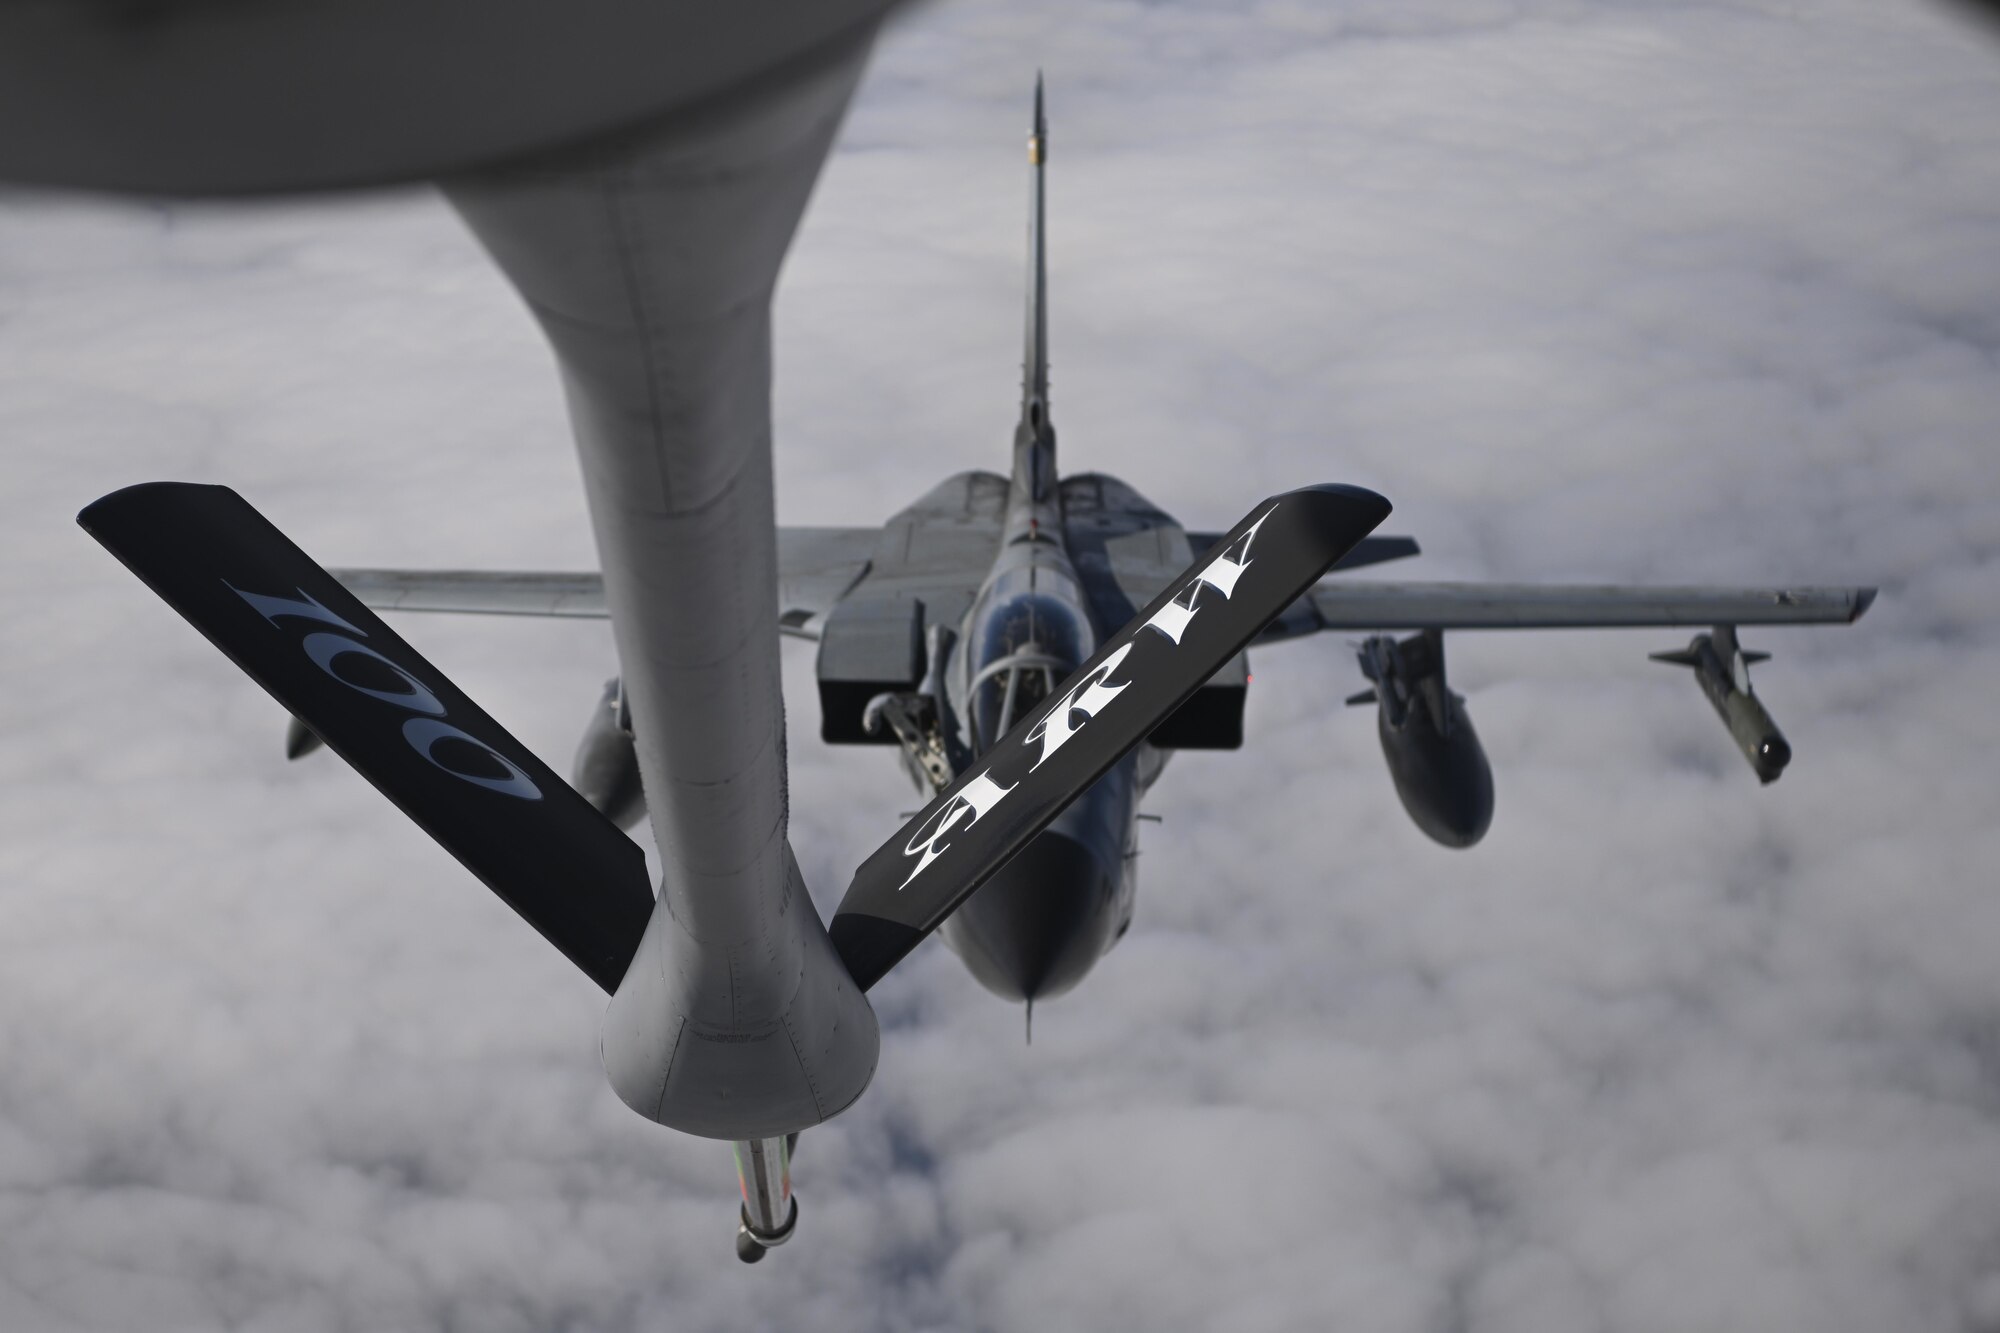 A German air force Tornado aircraft approaches a U.S. Air Force KC-135 Stratotanker aircraft assigned to the 100th Air Refueling Wing, Royal Air Force Mildenhall, England, to receive fuel over Germany Aug. 2, 2021. The 100th ARW is the only permanent air refueling wing in Europe and Africa. (U.S. Air Force photo by Senior Airman Joseph Barron)